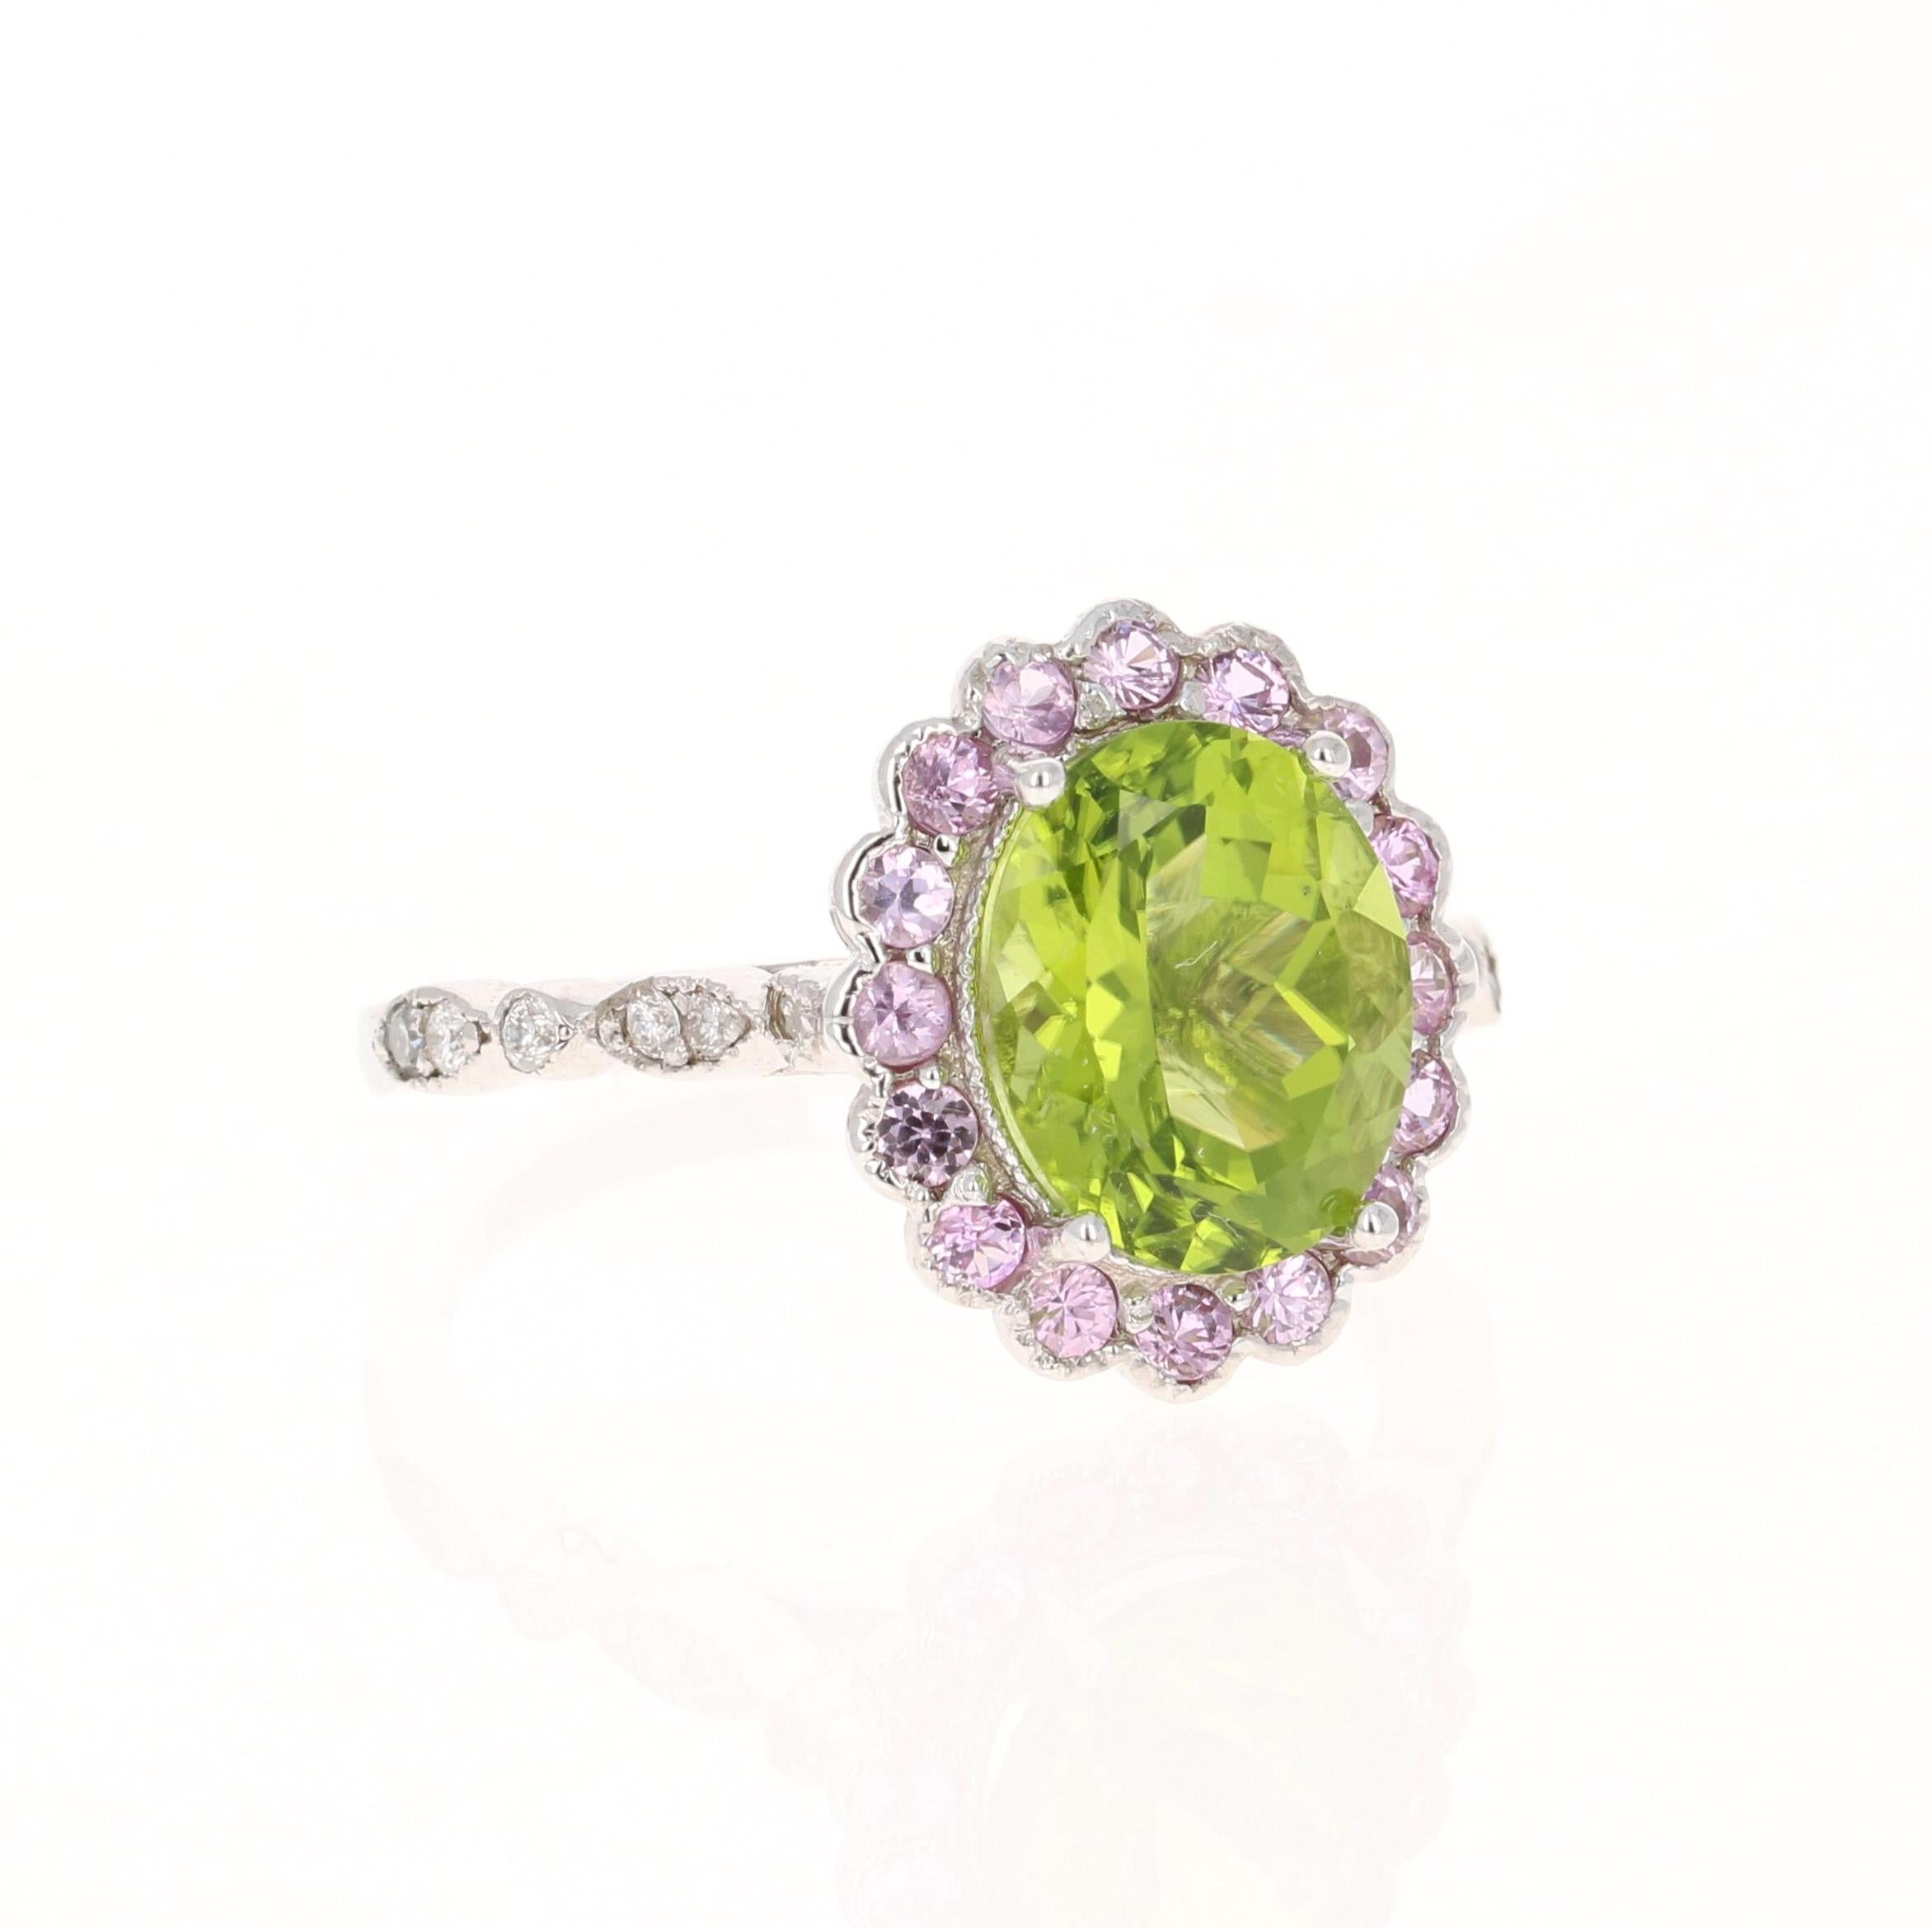 This ring has a 3.18 carat Oval Cut Peridot and 16 Pink Sapphires that weigh 0.53 Carats and 12 Round Cut Diamonds that weigh 0.13 carats (Clarity: VS, Color: H) The total carat weight of the ring is 3.84 Carats. The Peridot measures at 10 mm x 8